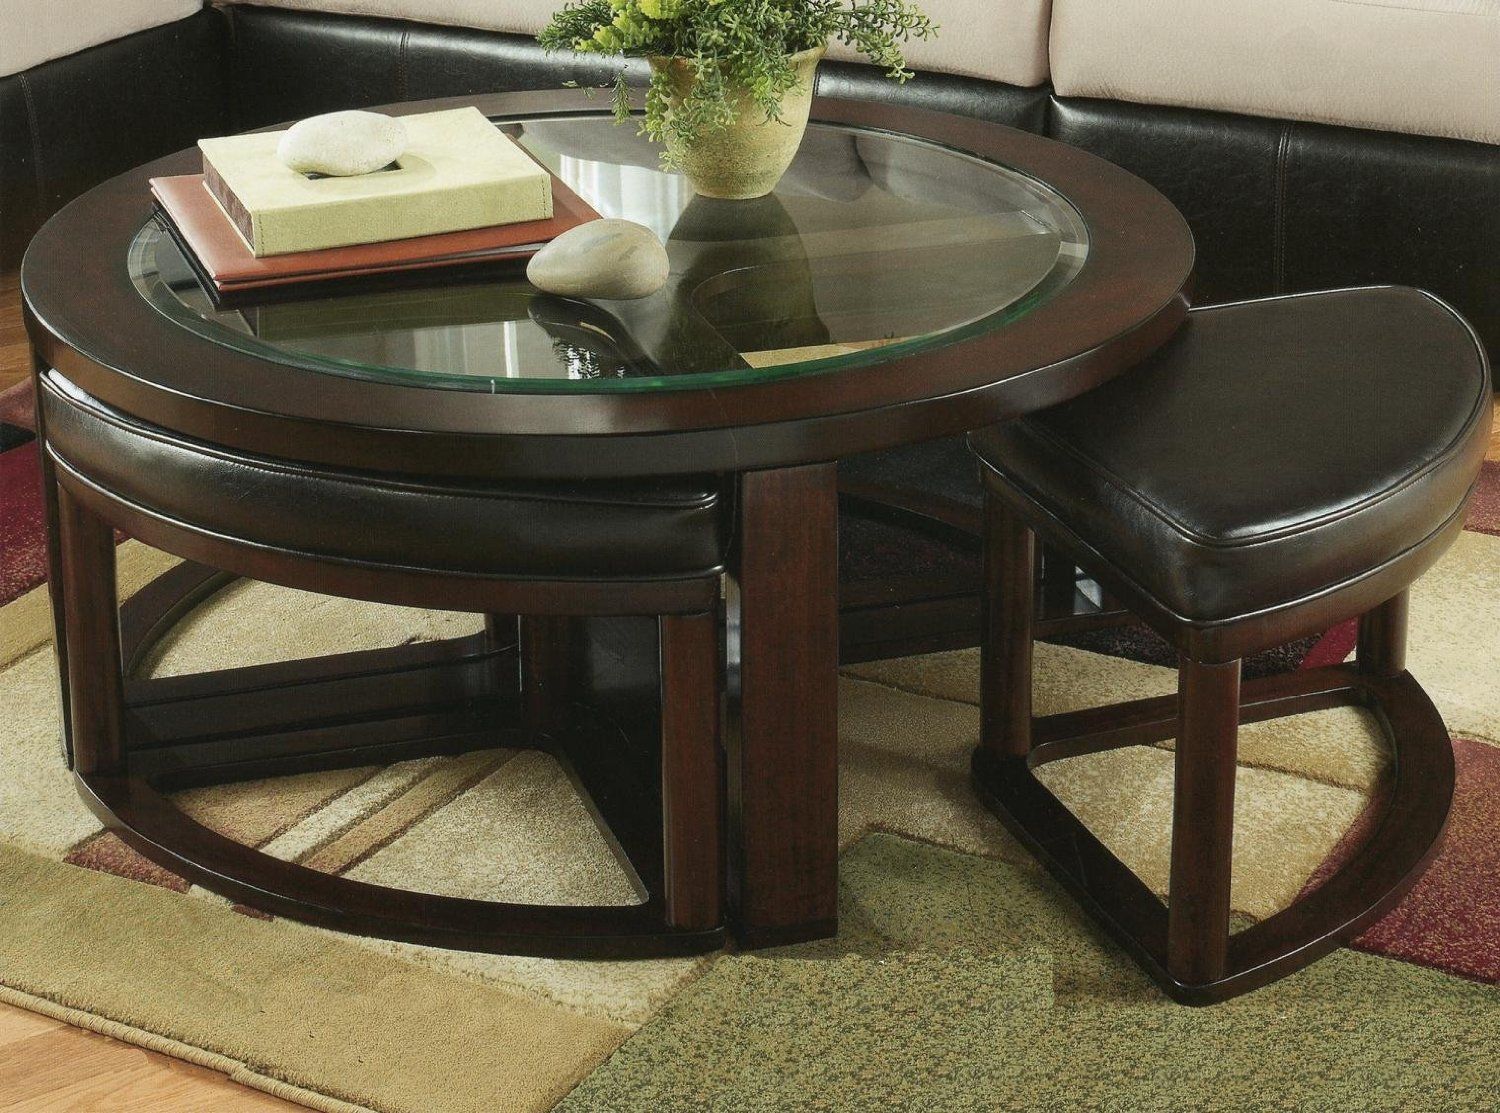 Roundhill Furniture Cylina Solid Wood Glass Top Round Coffee Table With 4 Stools (View 10 of 10)